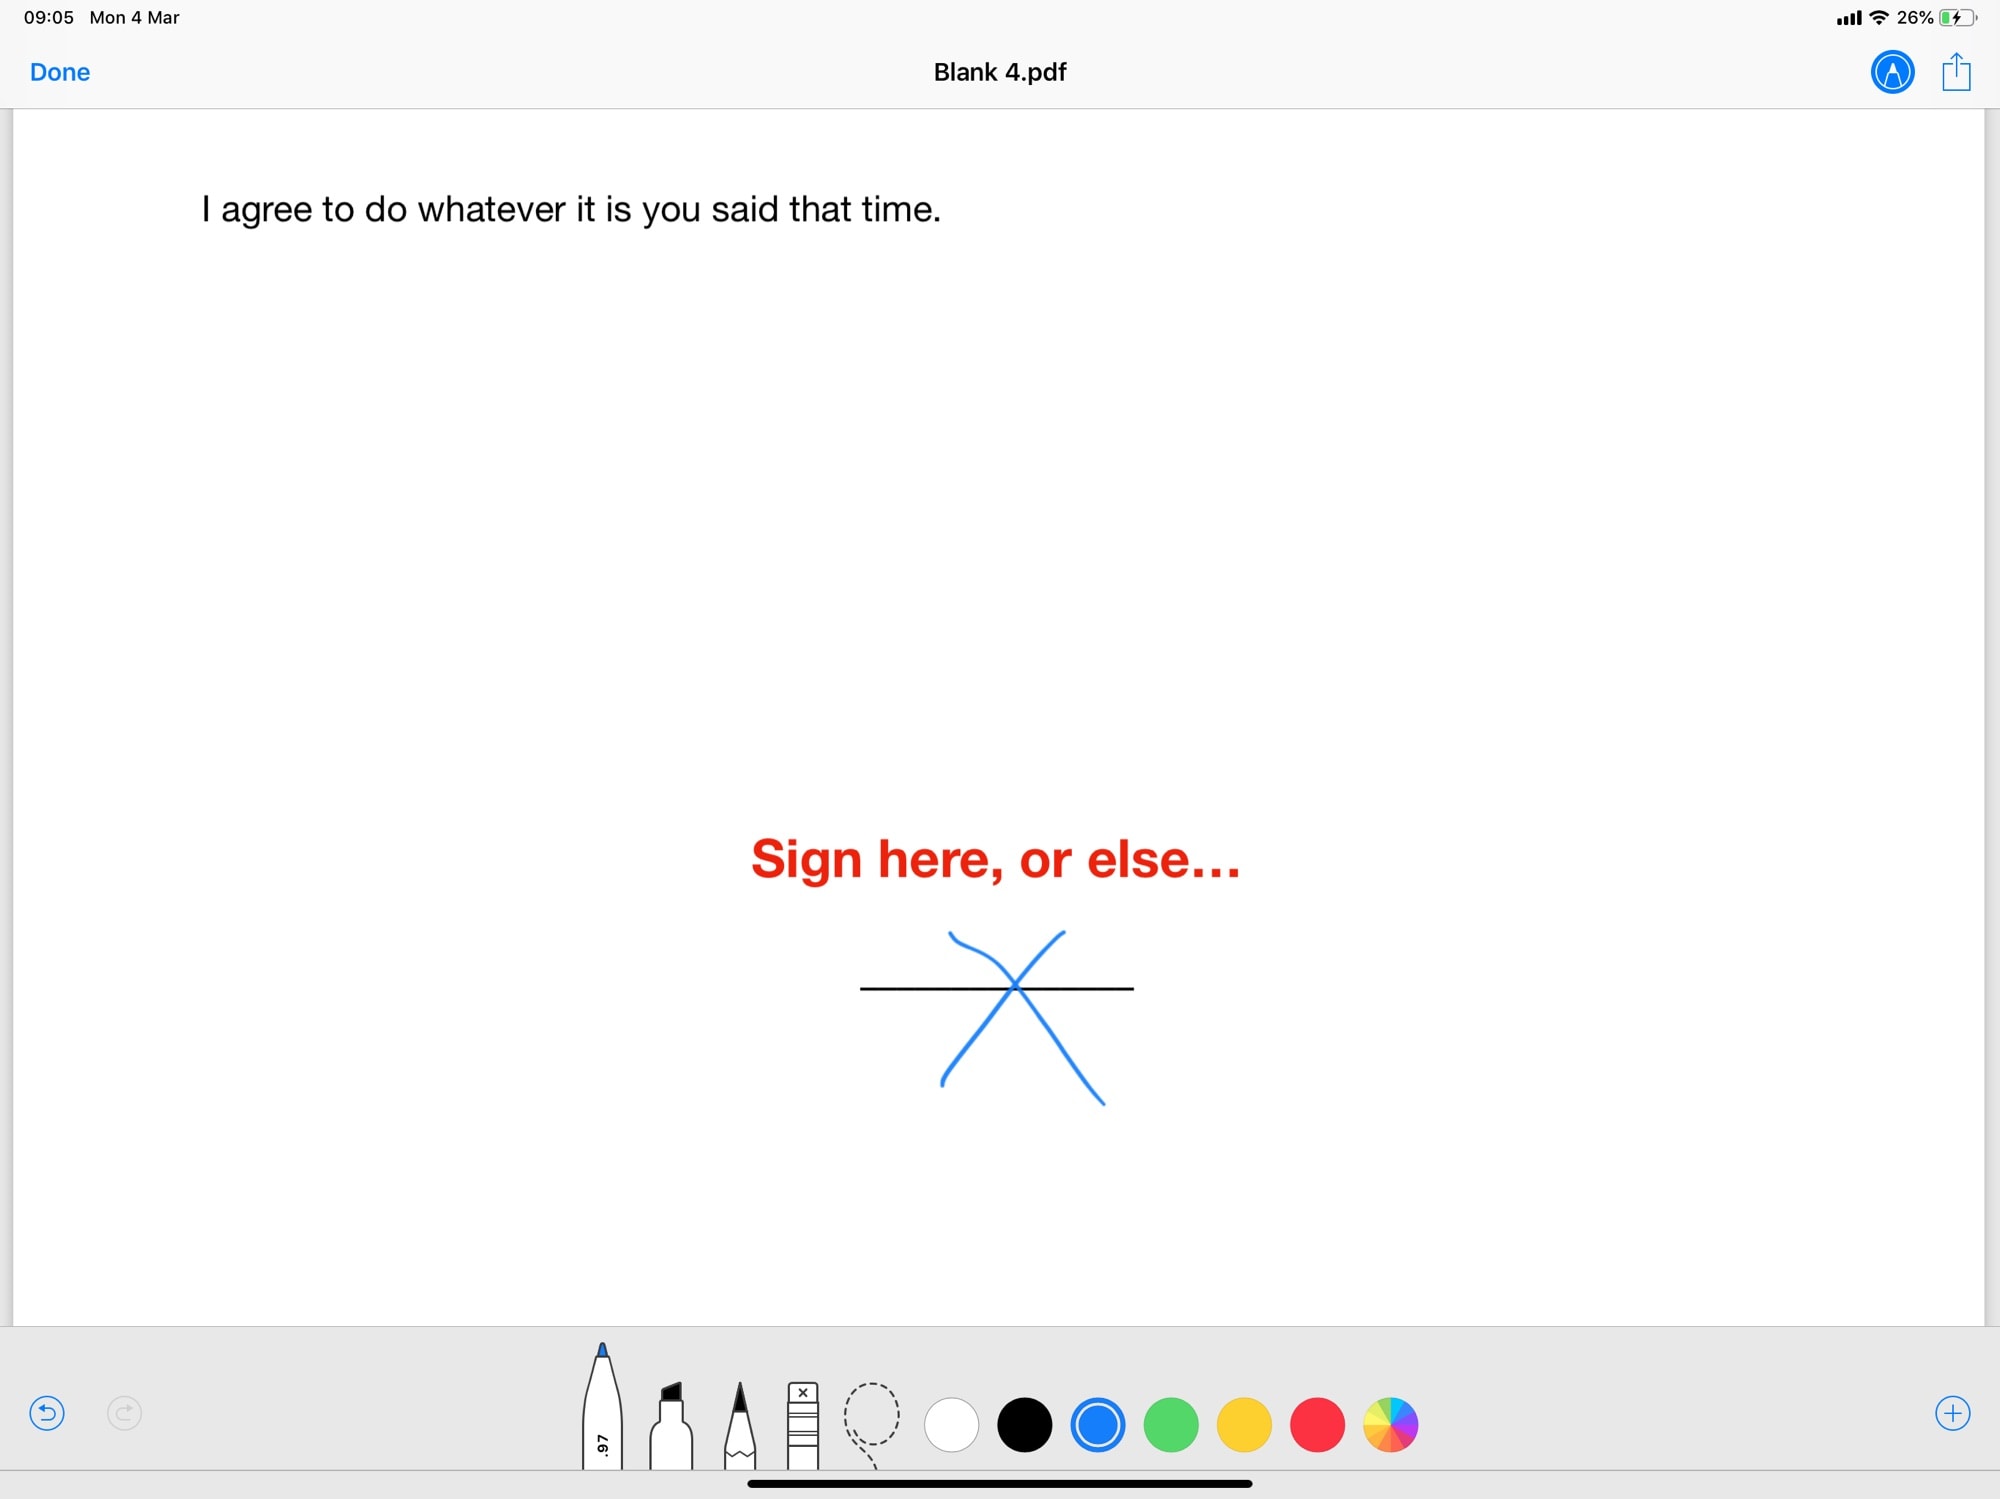 Sign here. It's easy to sign PDFs on iPad or iPhone with Instant Markup.